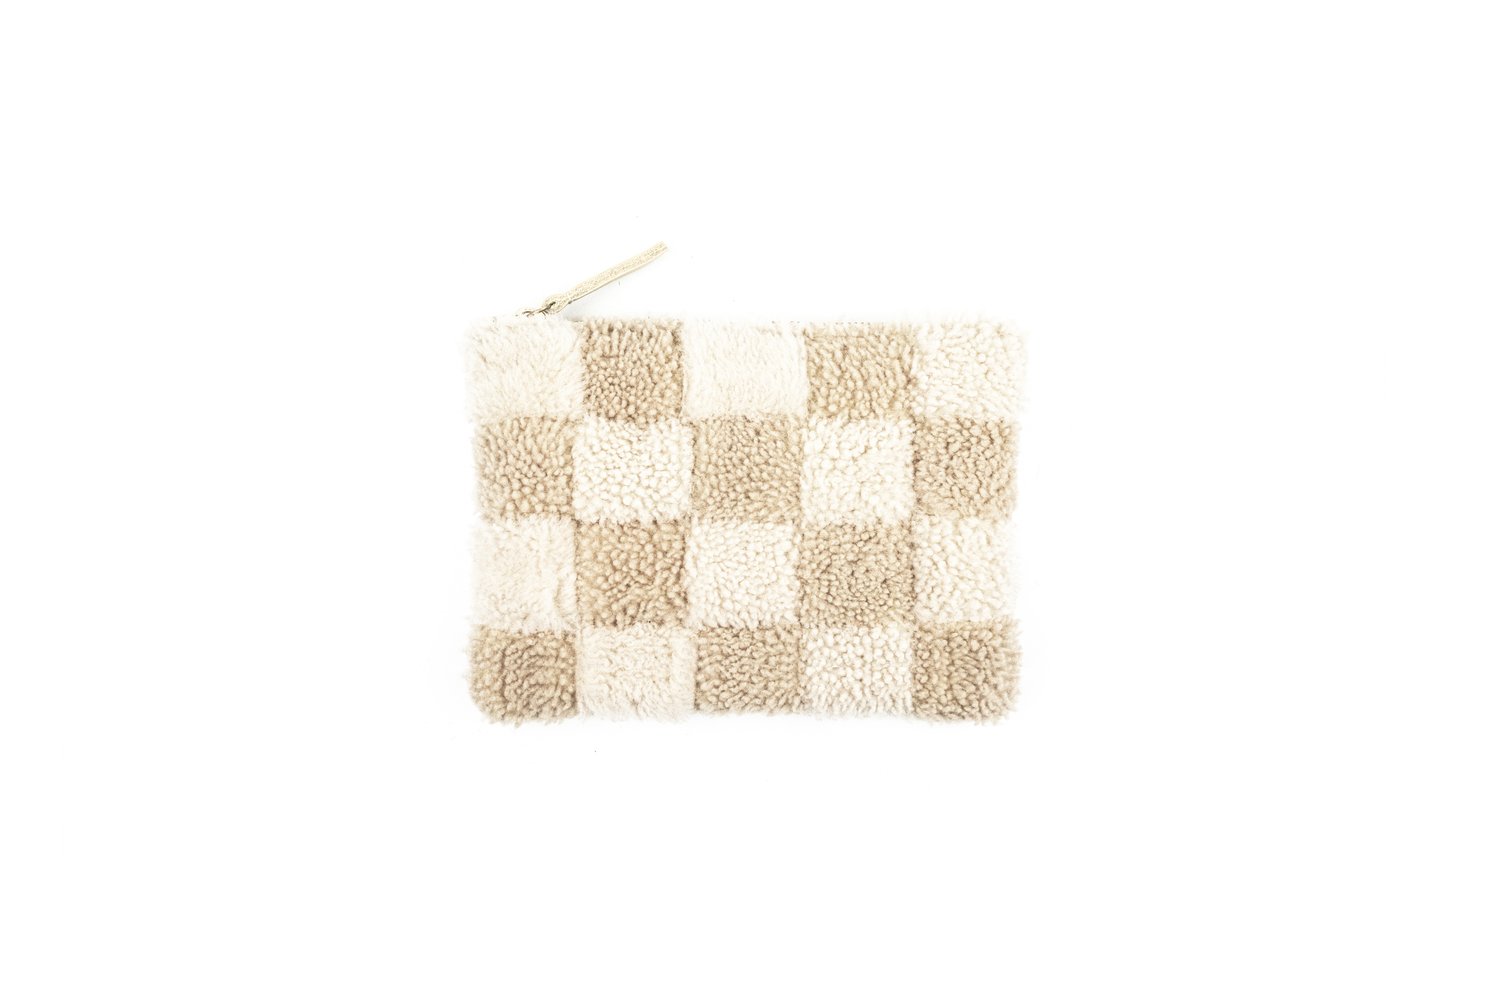 Patchwork Shearling Zipper Pouch - Beige Check